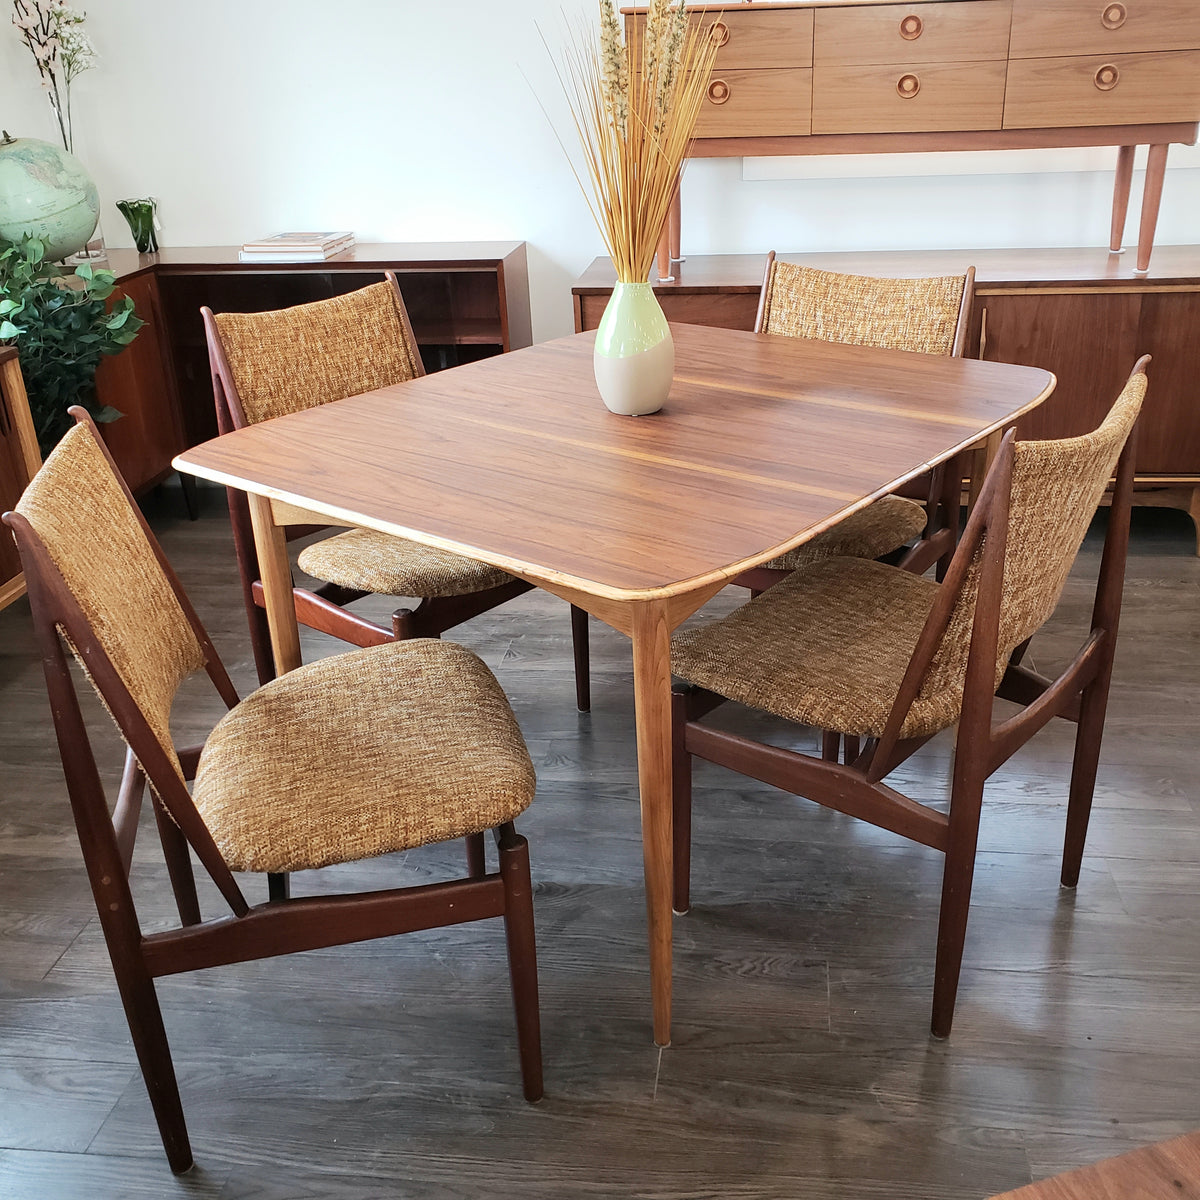 Vintage Four Seater Dining Table by Deilcraft